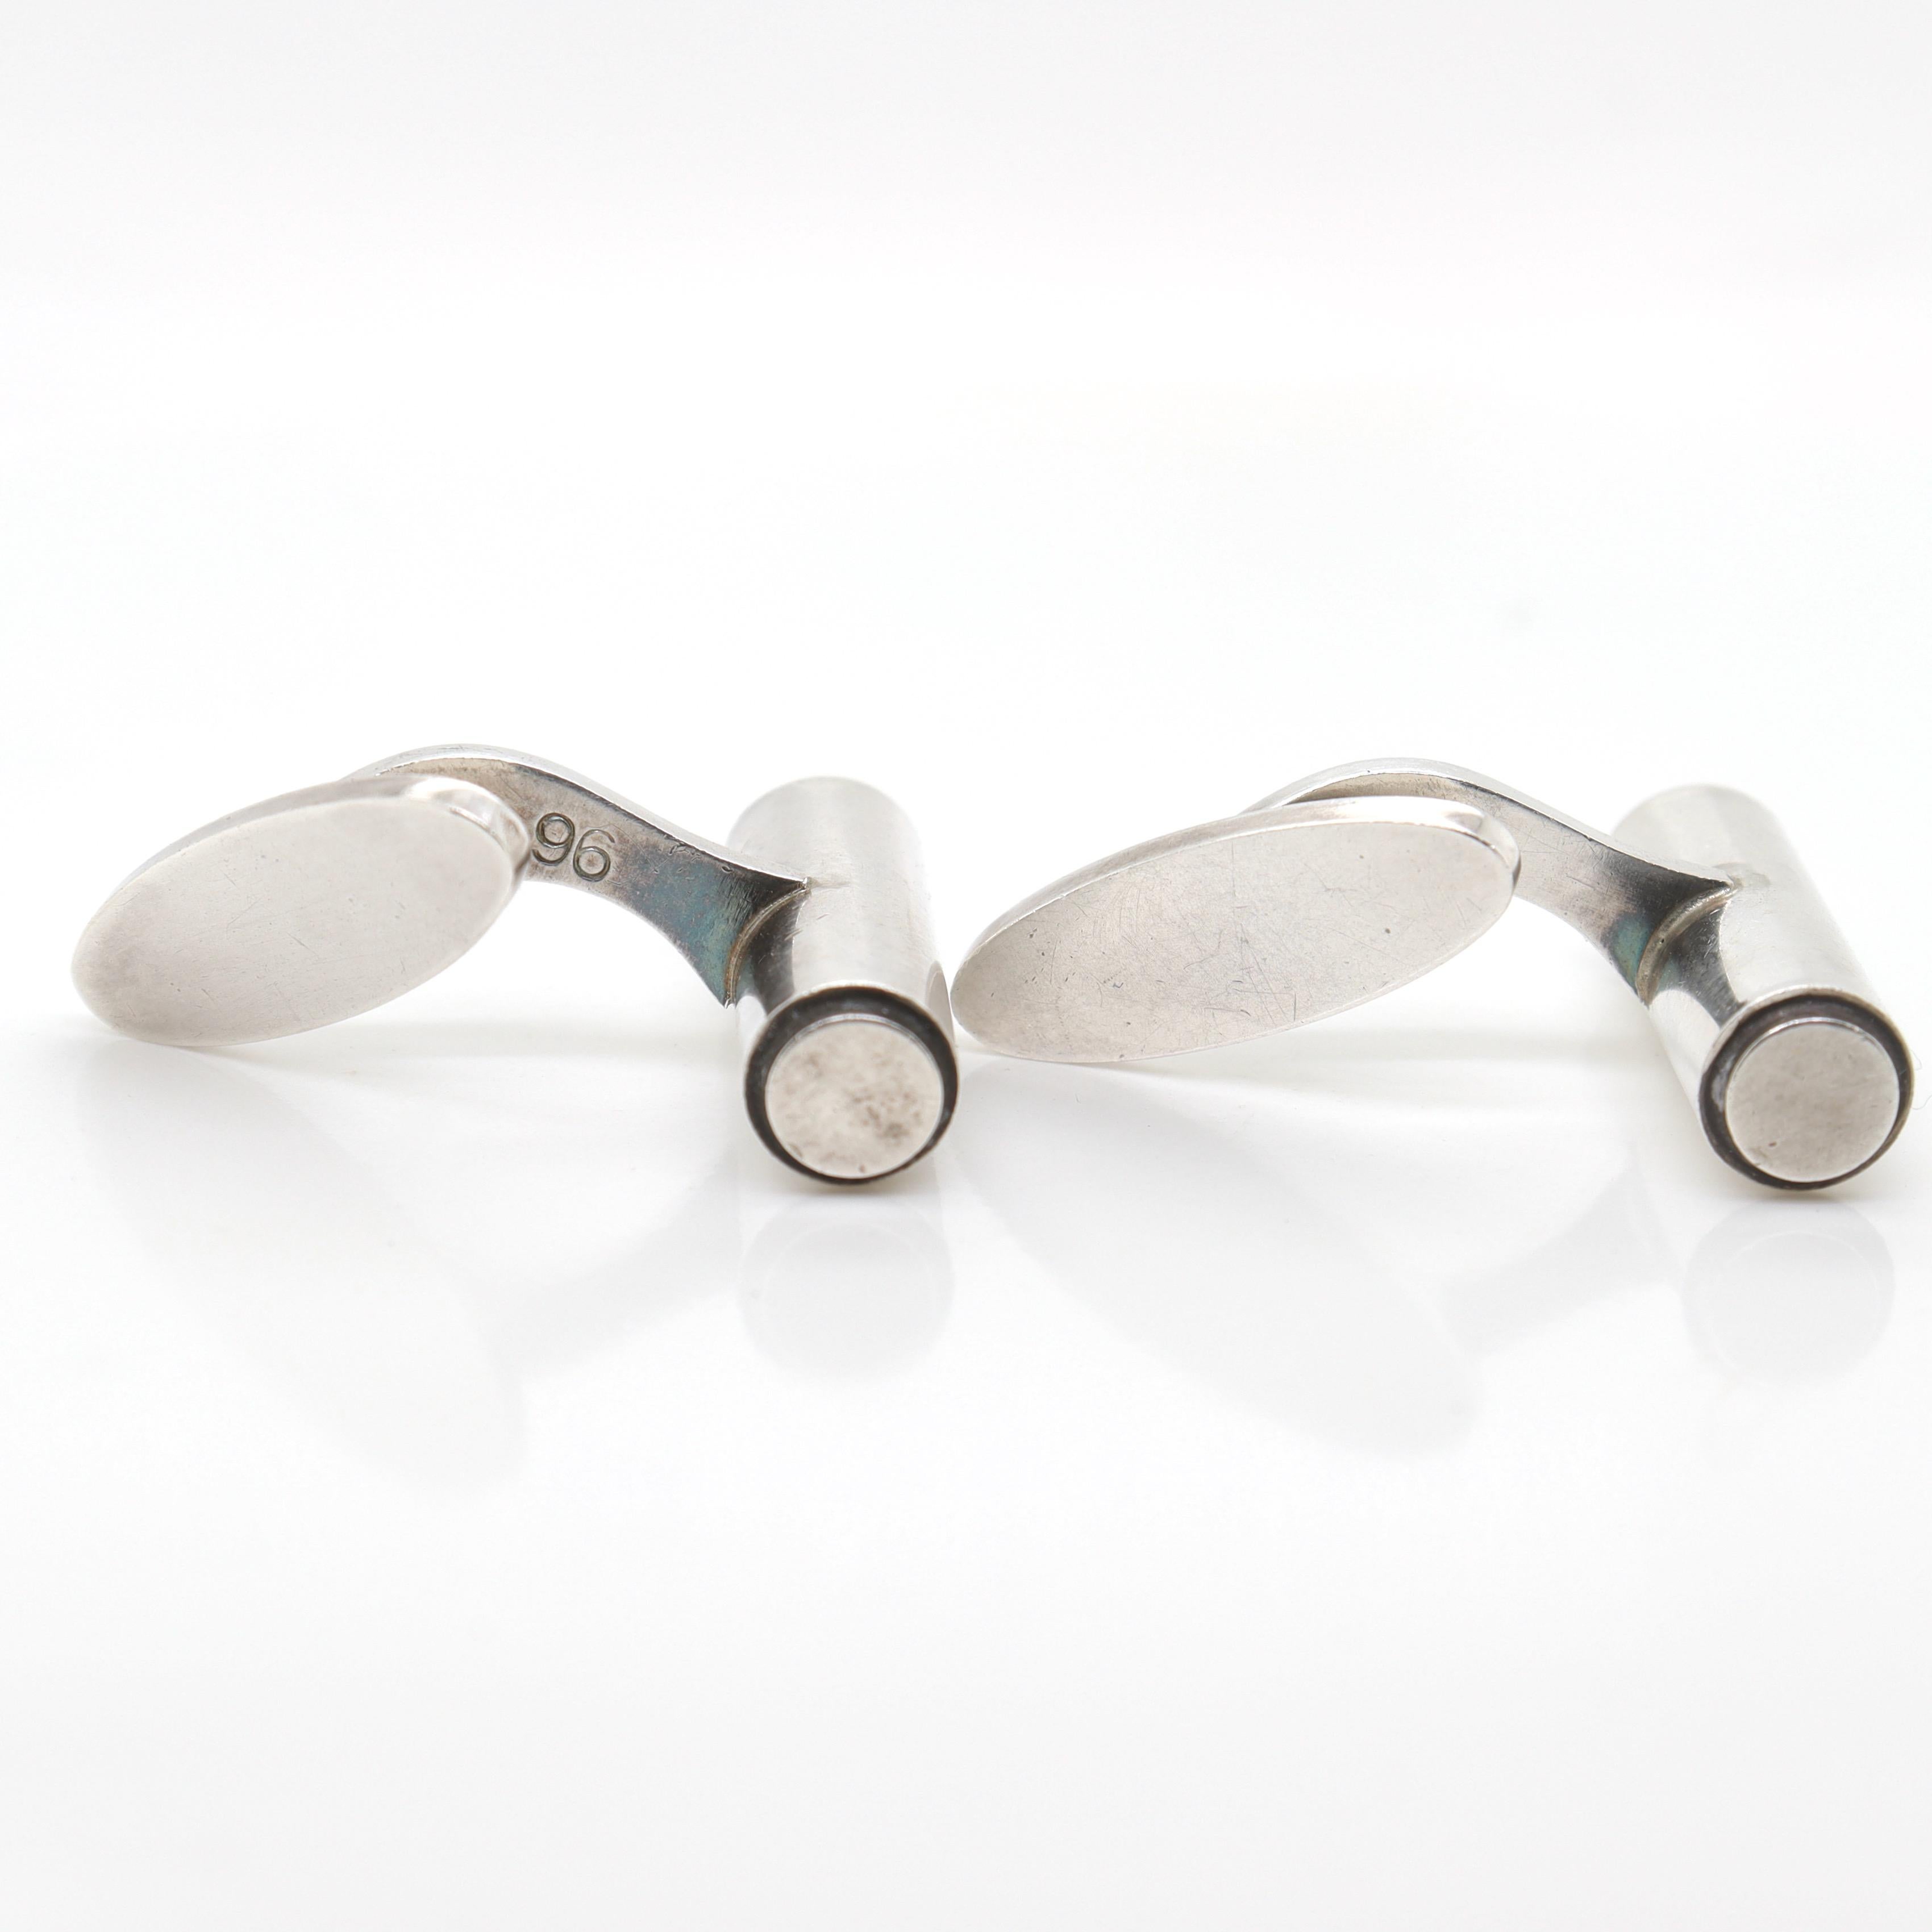 Pair of Georg Jensen Sterling Silver Cufflinks No. 96 For Sale 3